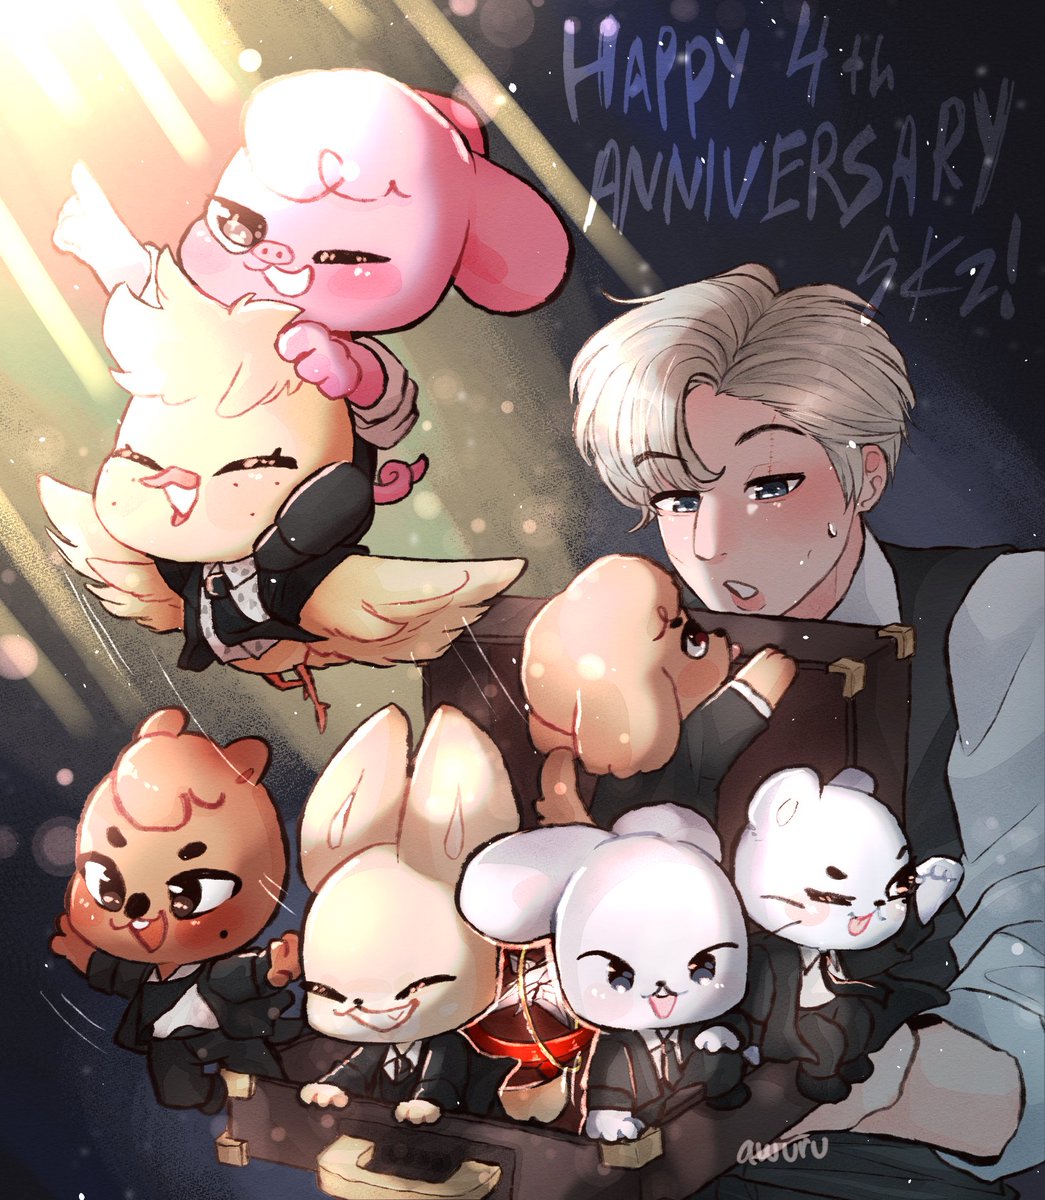 「Happy 4th debut anniversary Stray Kids!
」|awuru | comms full!のイラスト